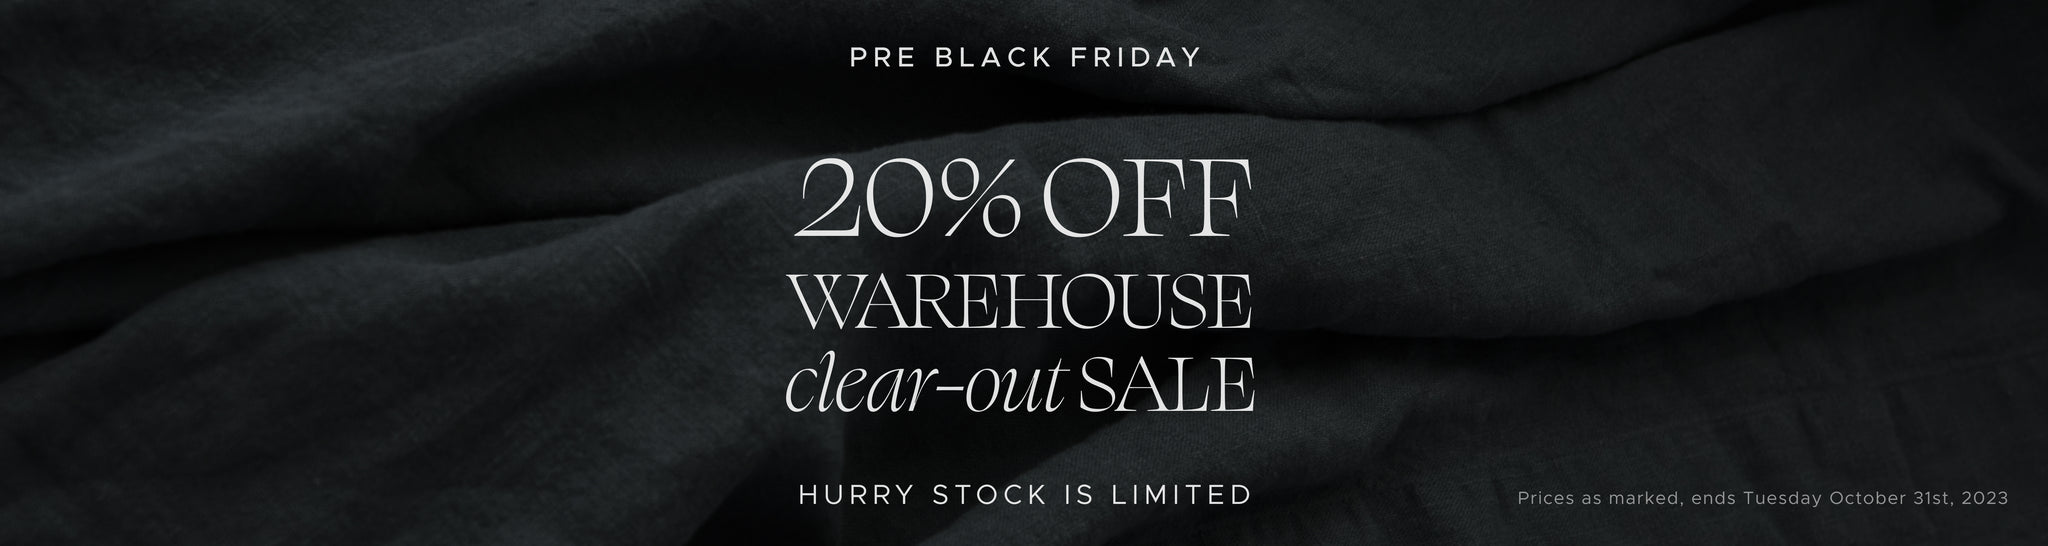 Pre Black Friday Warehouse Clear Out Sale: Starts 10-27-23, ends 10-31-23